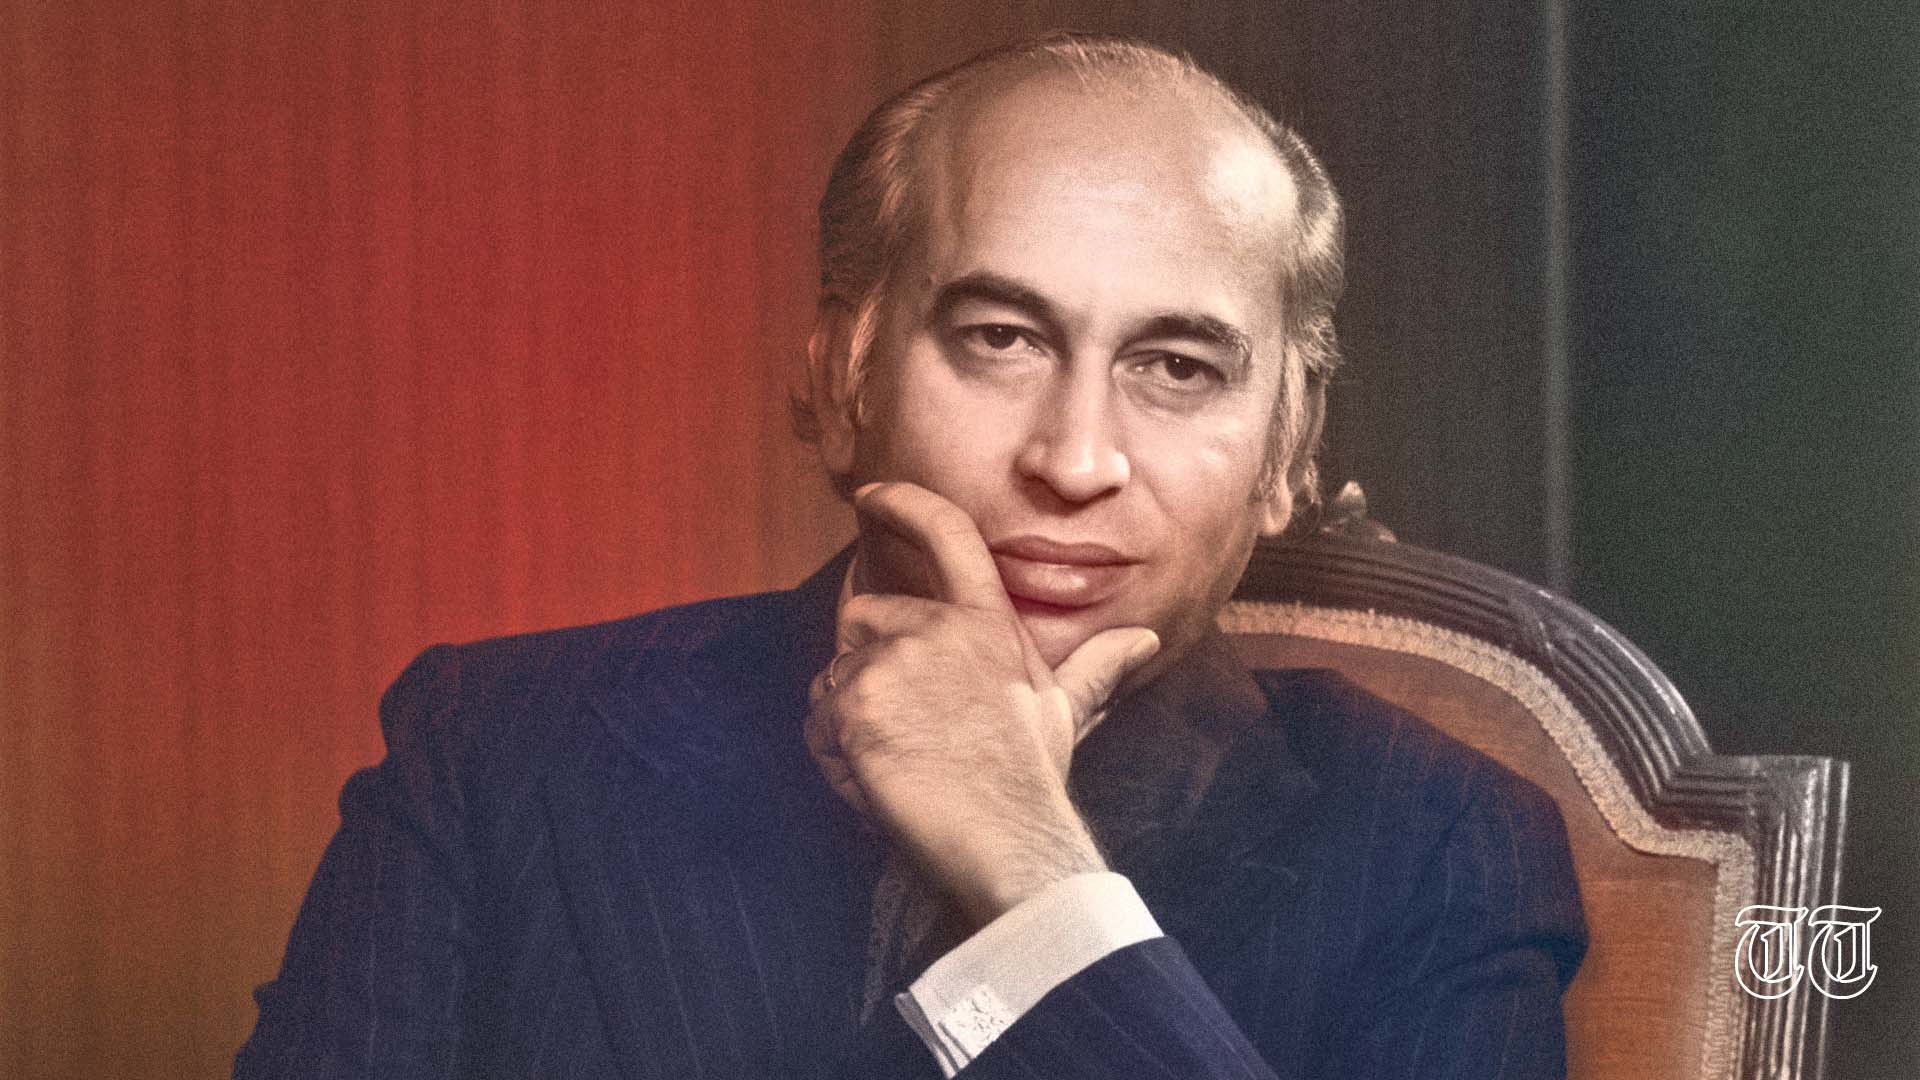 A file photo is shown of former prime minister Zulfikar Ali Bhutto in 1976. — FILE/THE THURSDAY TIMES